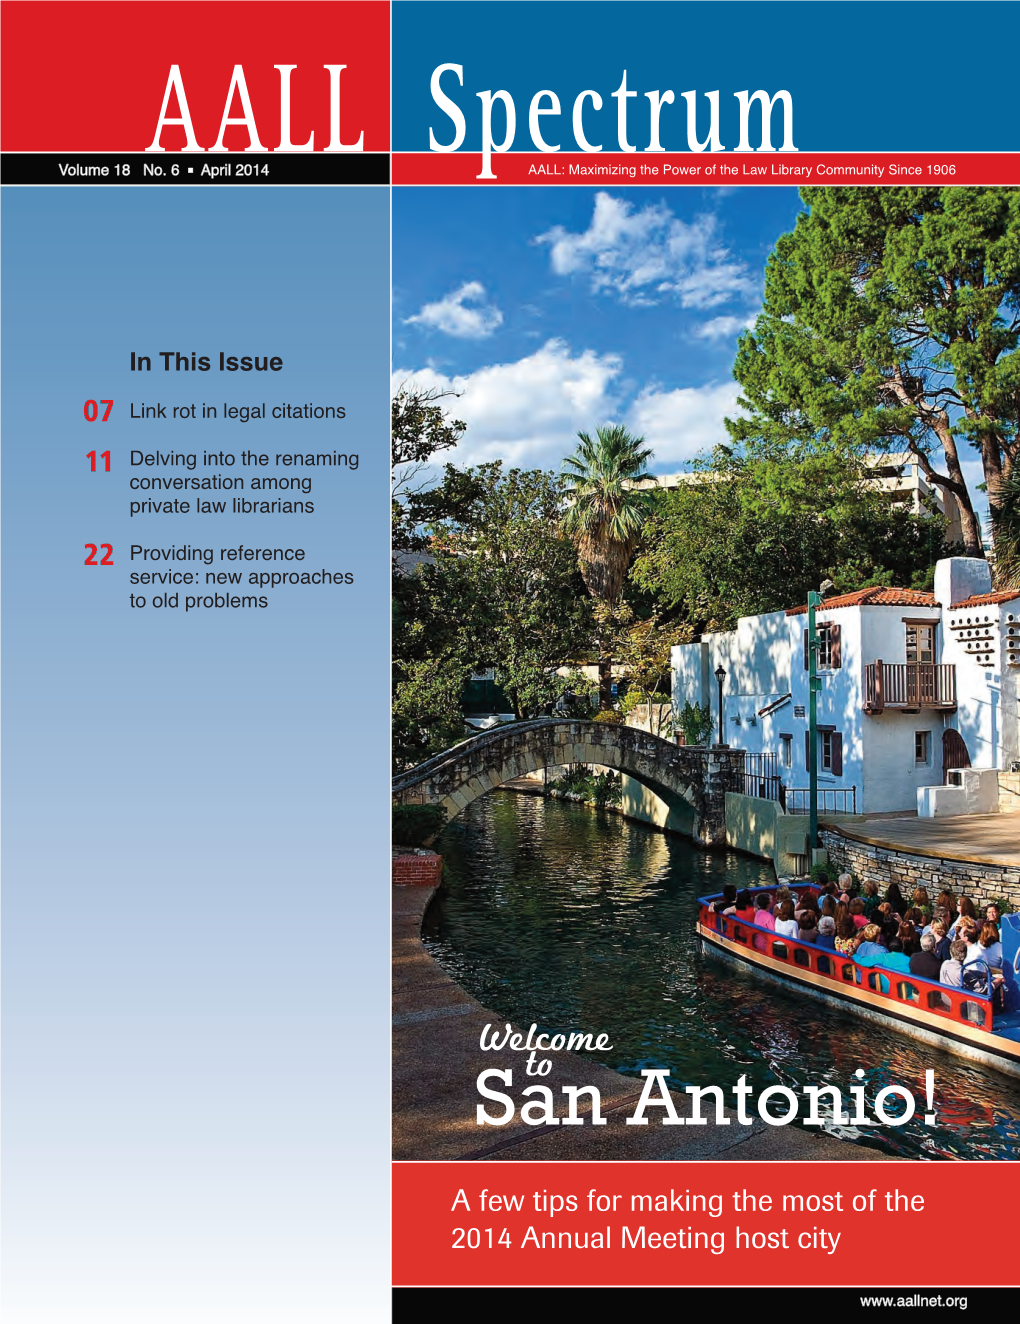 San Antonio! a Few Tips for Making the Most of the 2014 Annual Meeting Host City